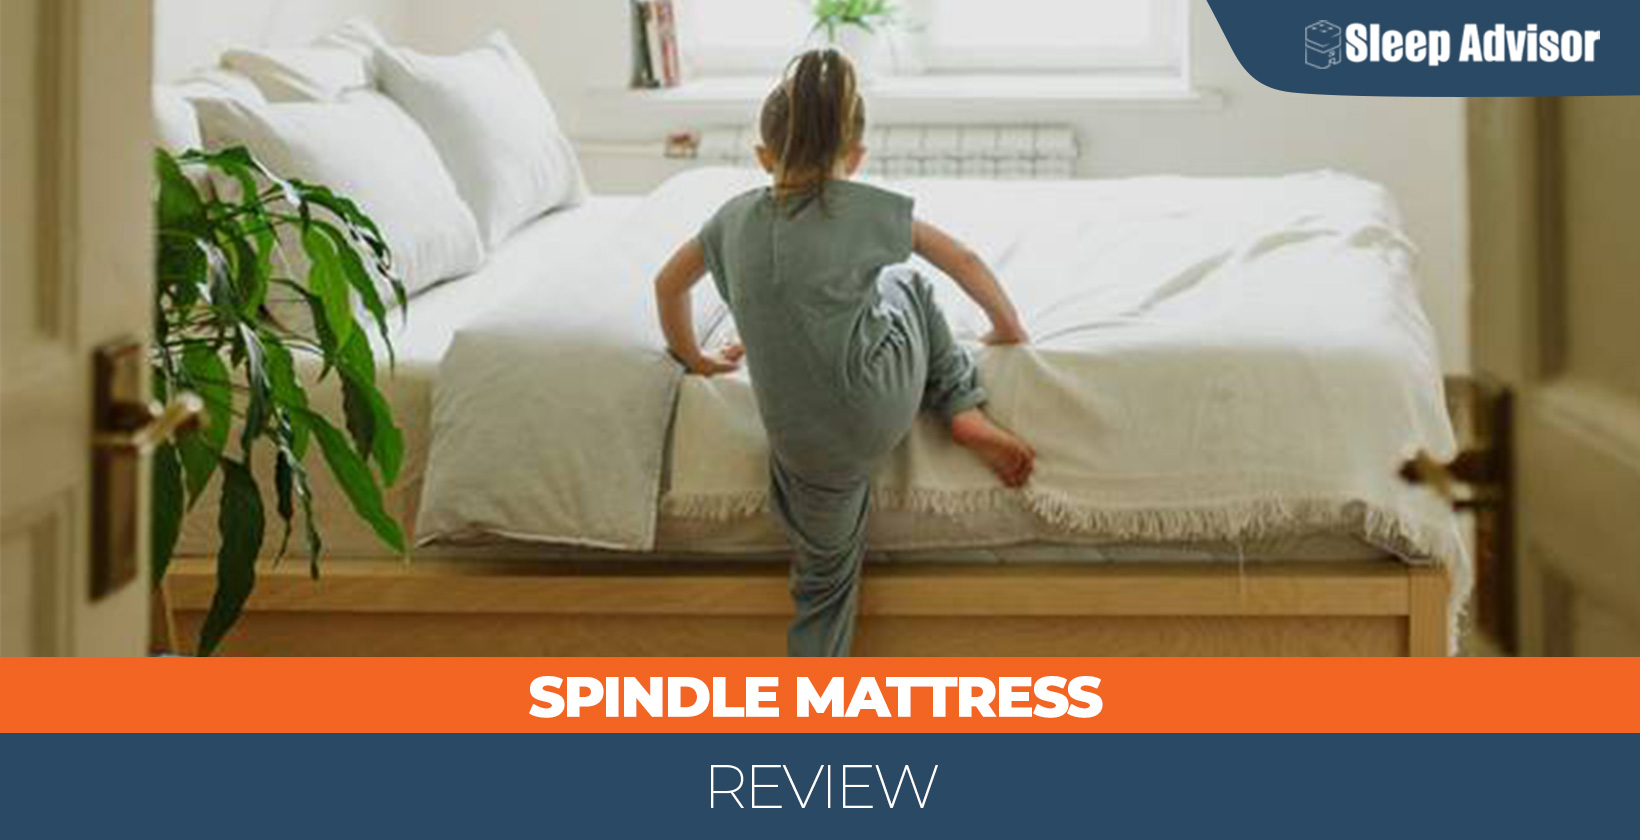 Our in depth Spindle Mattress review